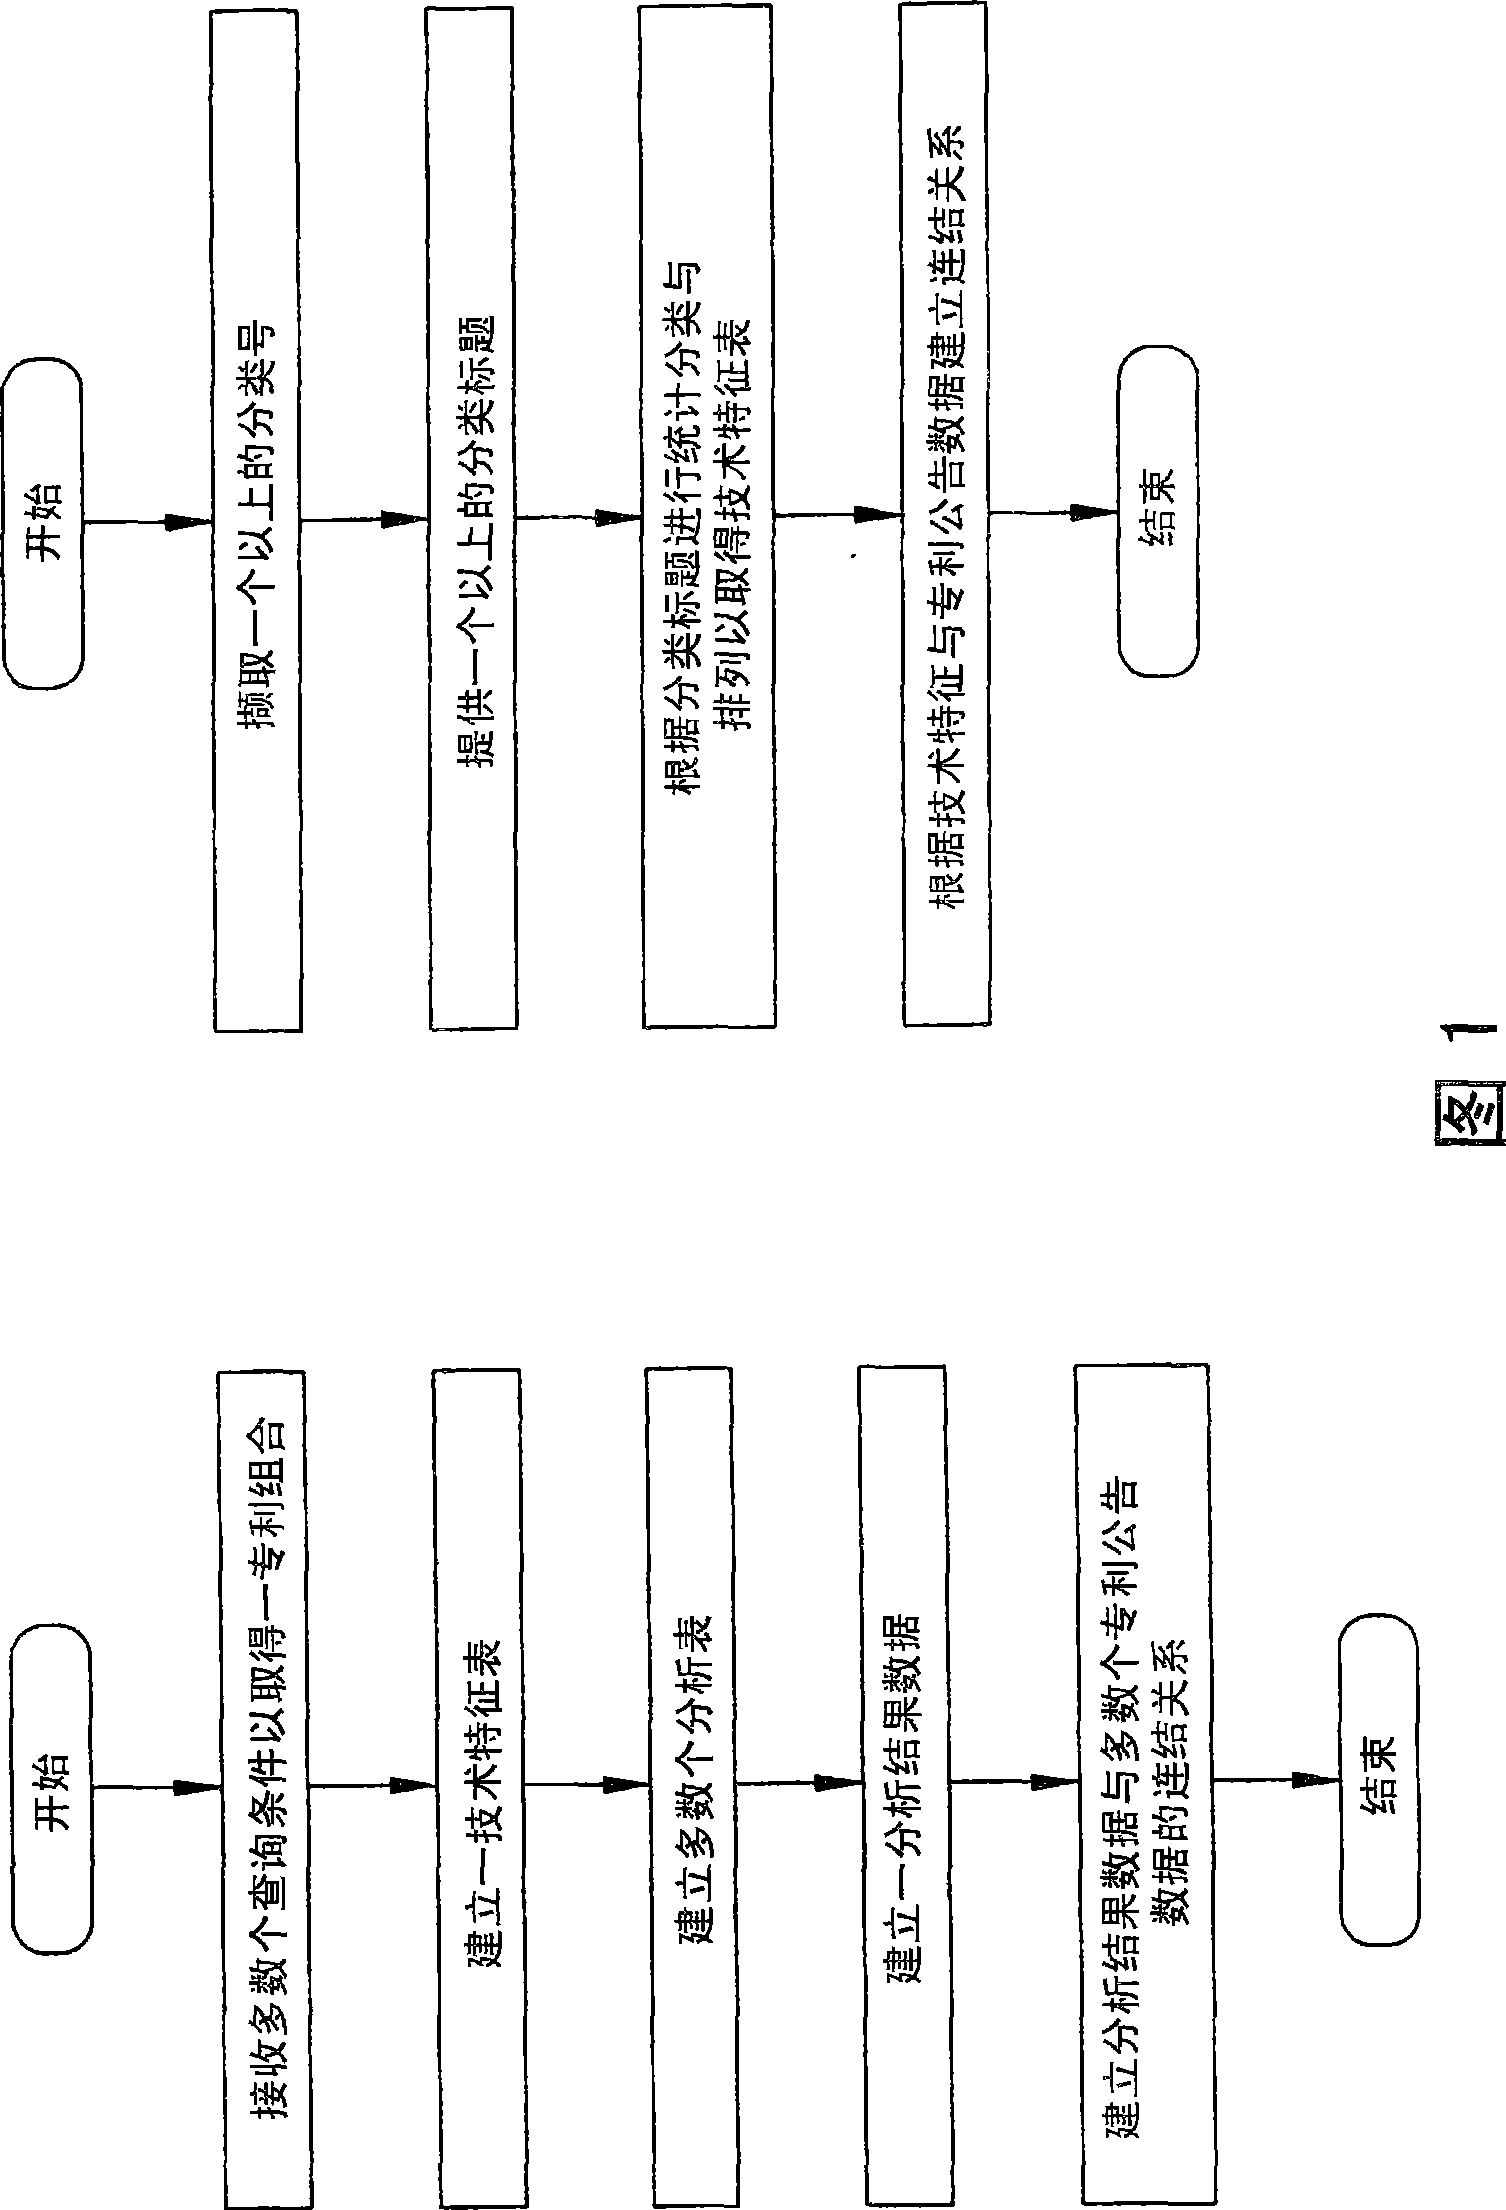 System and method of technical data analysis